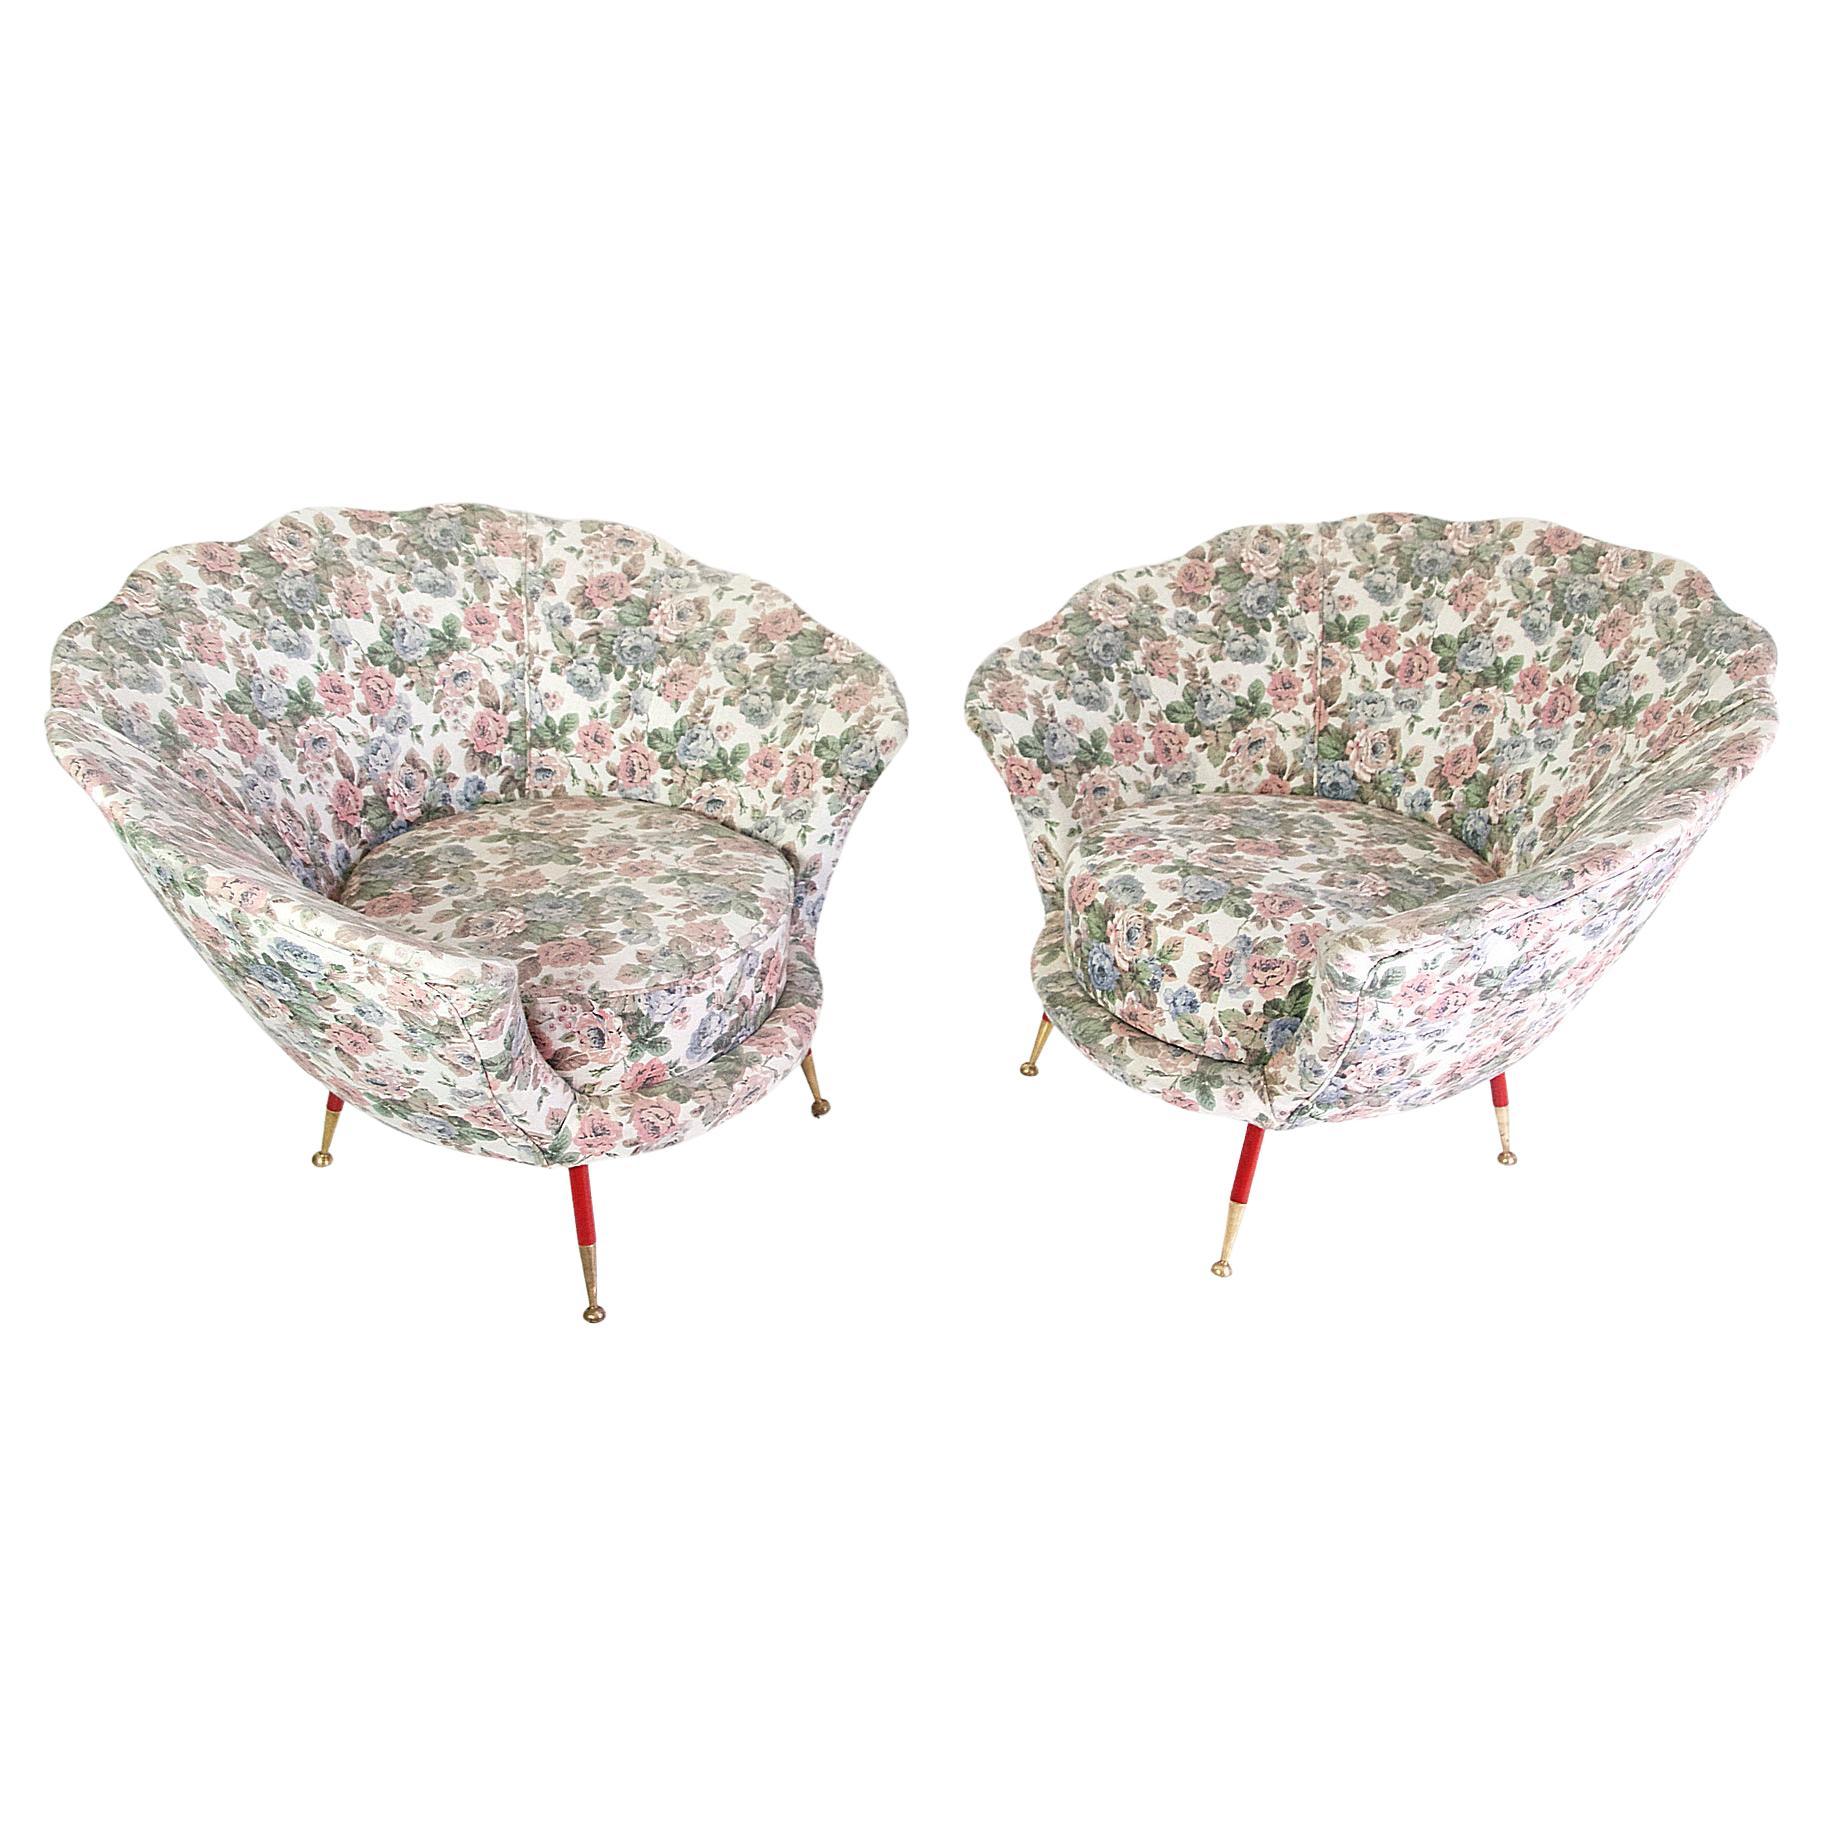 Pair of Midcentury Italian Clam Shell Armchairs For Sale